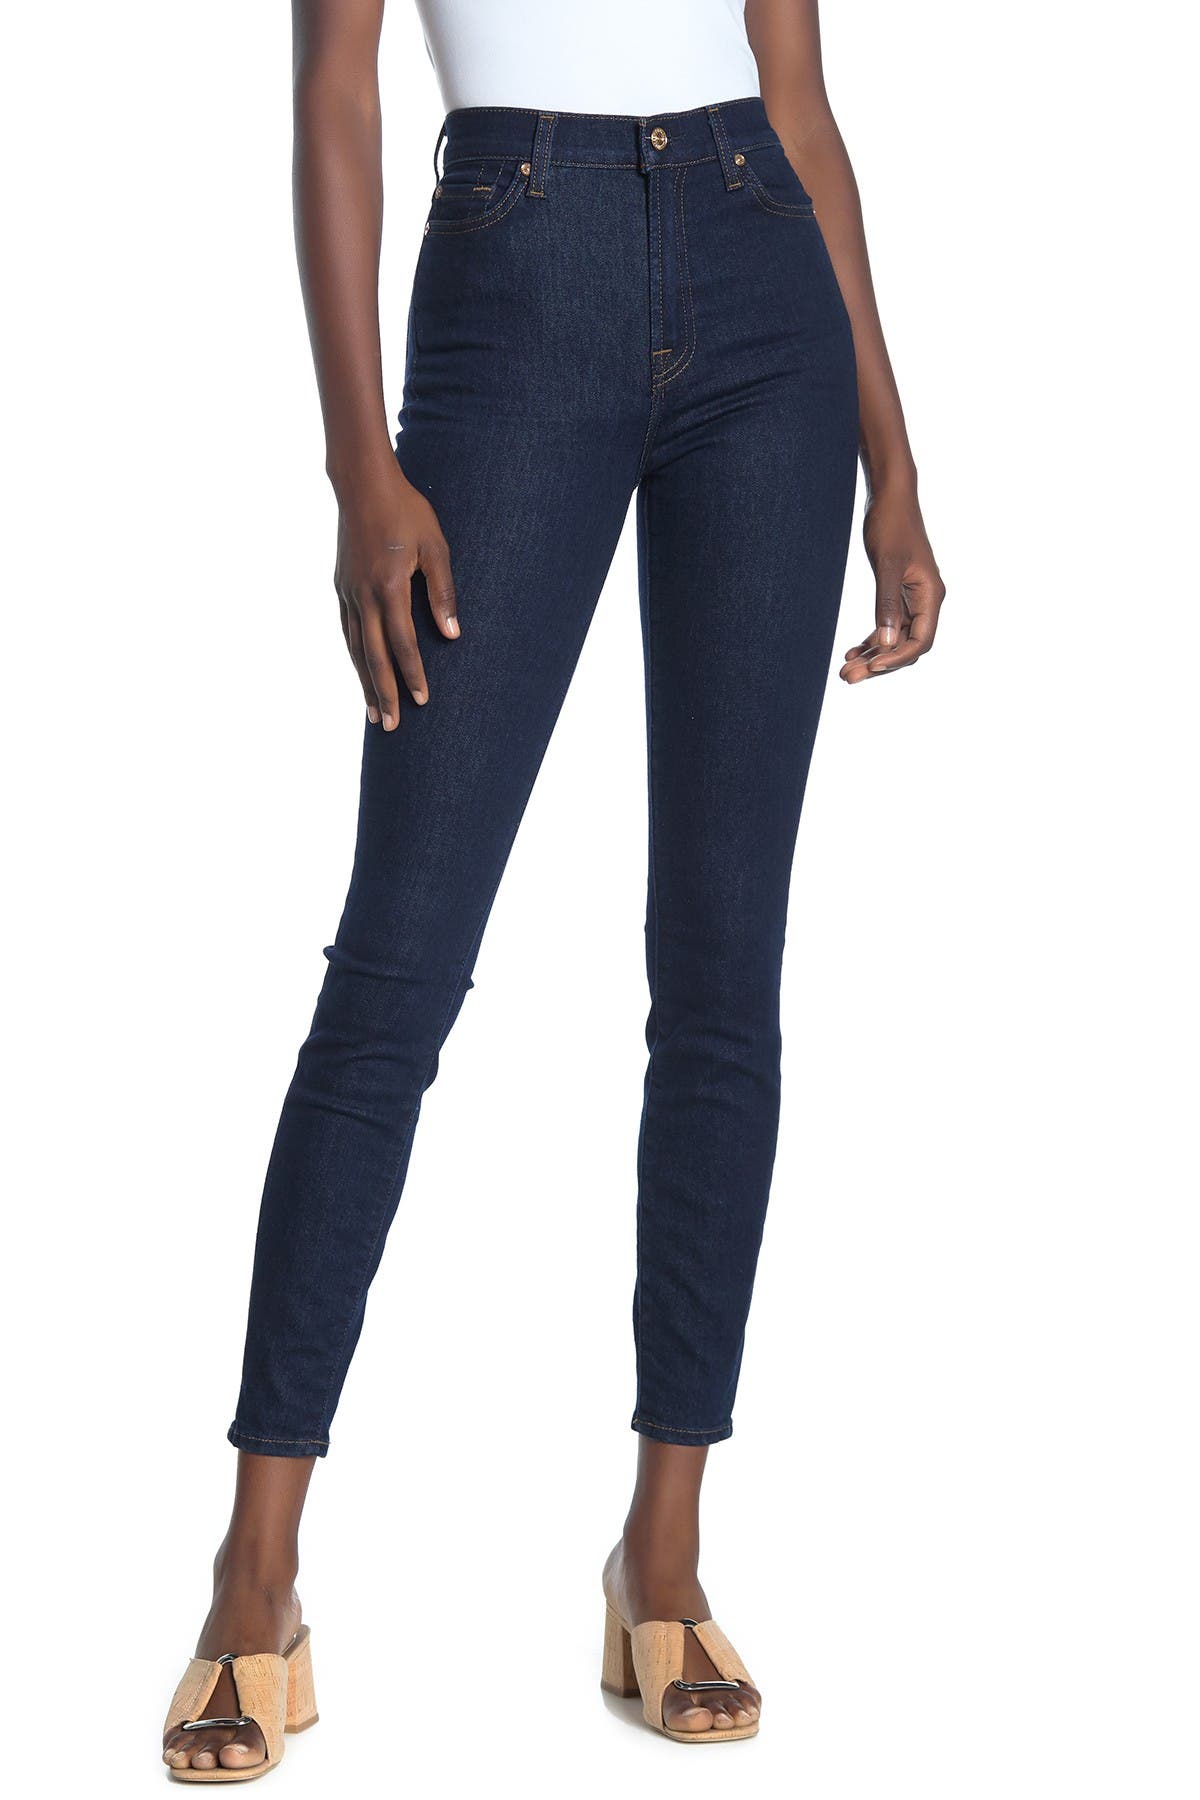 7 for all mankind blair